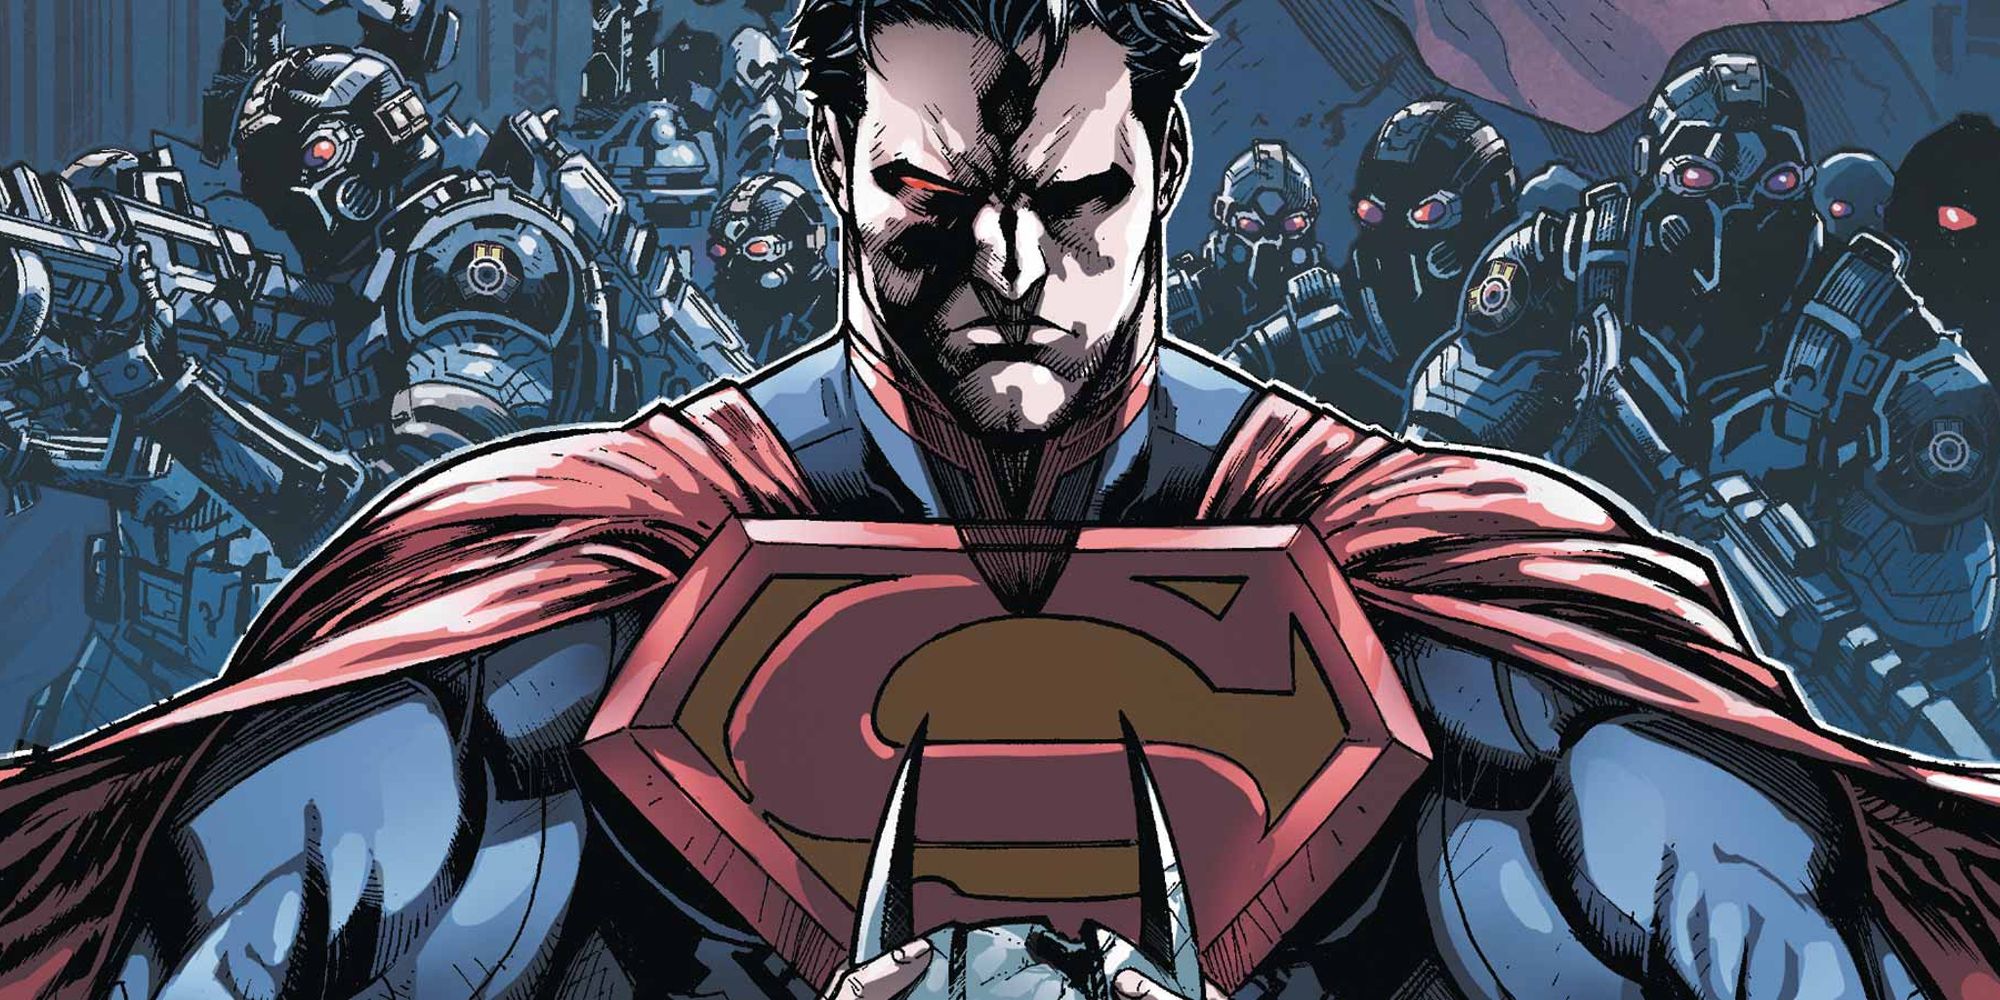 Superman holding Batman's cowl while surrounding by his regime soldiers in Injustice Gods Among Us